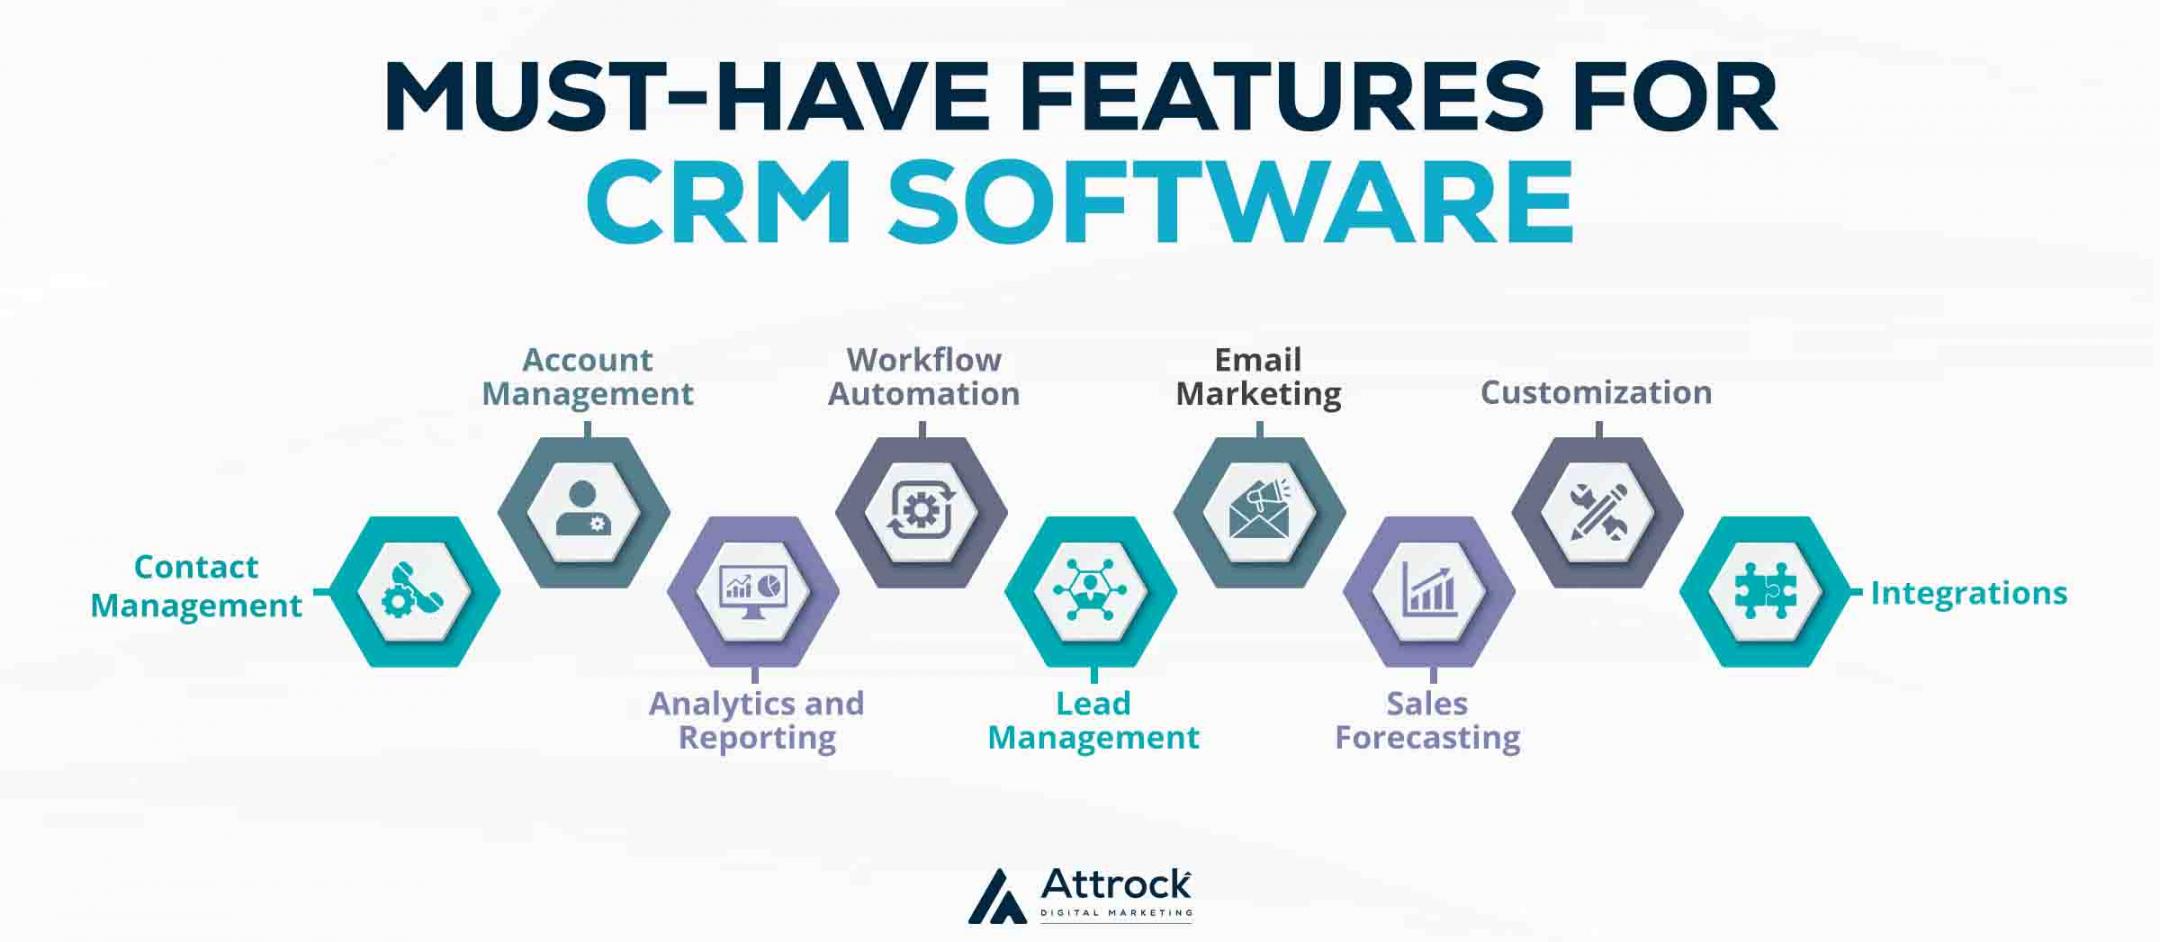 Must-Have Features for CRM Software